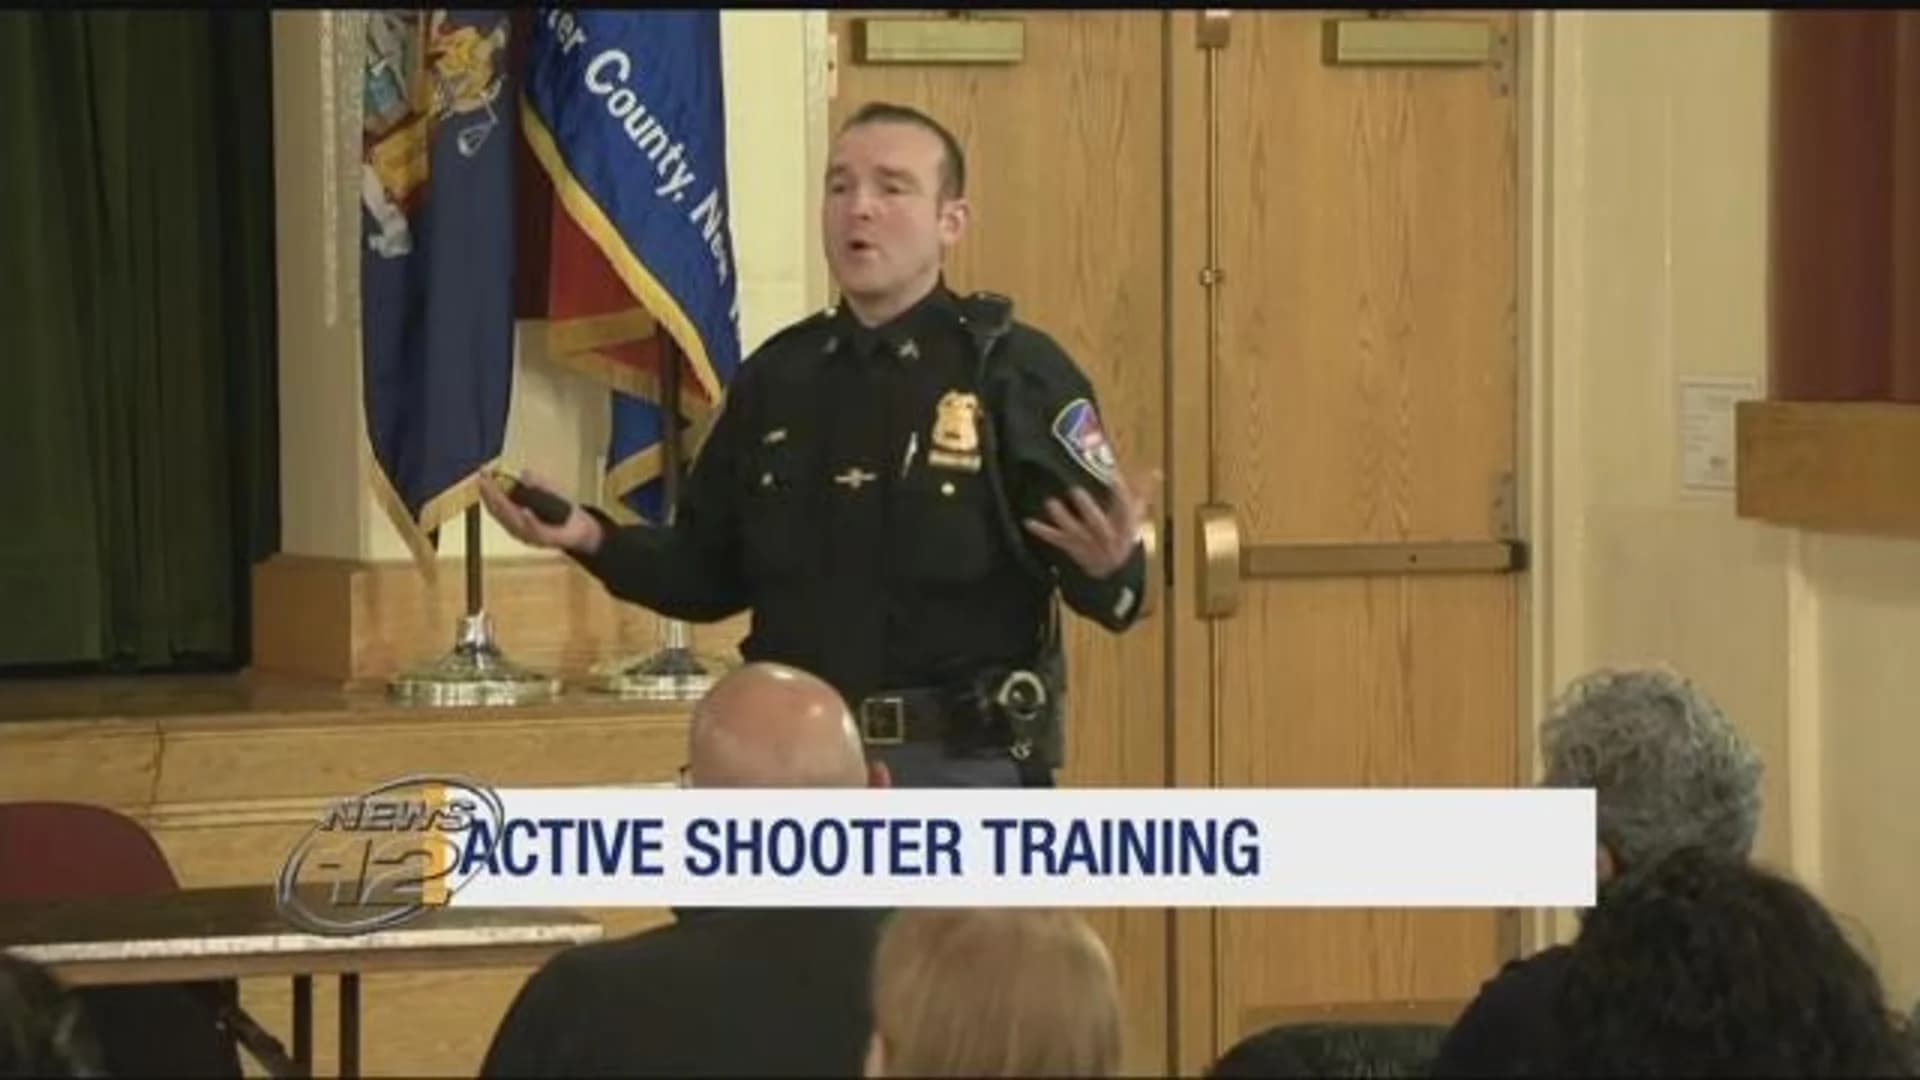 Be prepared: Police teach survival skills for active shooter situations